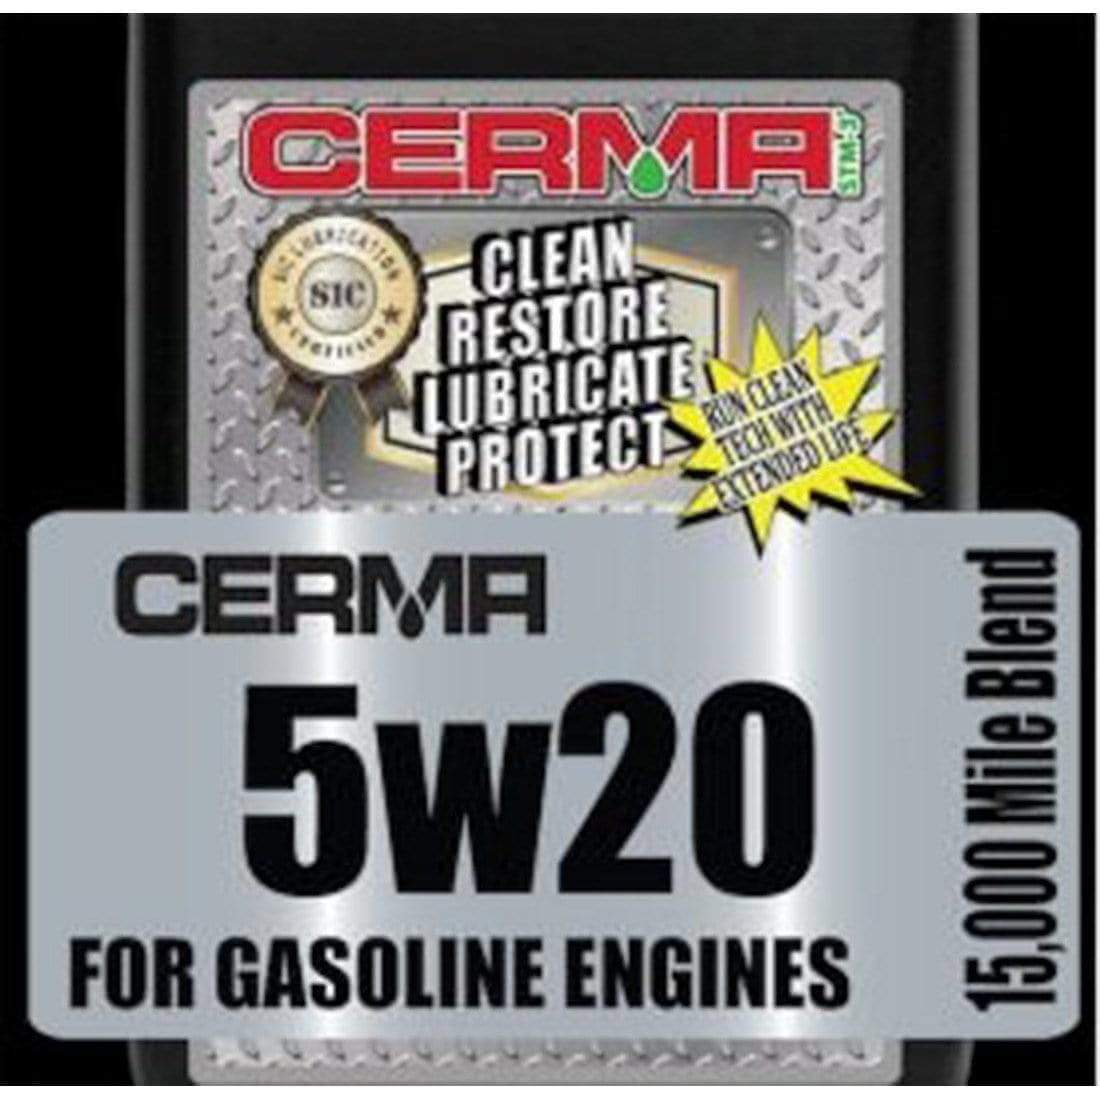 5W-20W Cerma Synthetic Ceramic Motor Oil at $12.95 only from cermatreatment.com